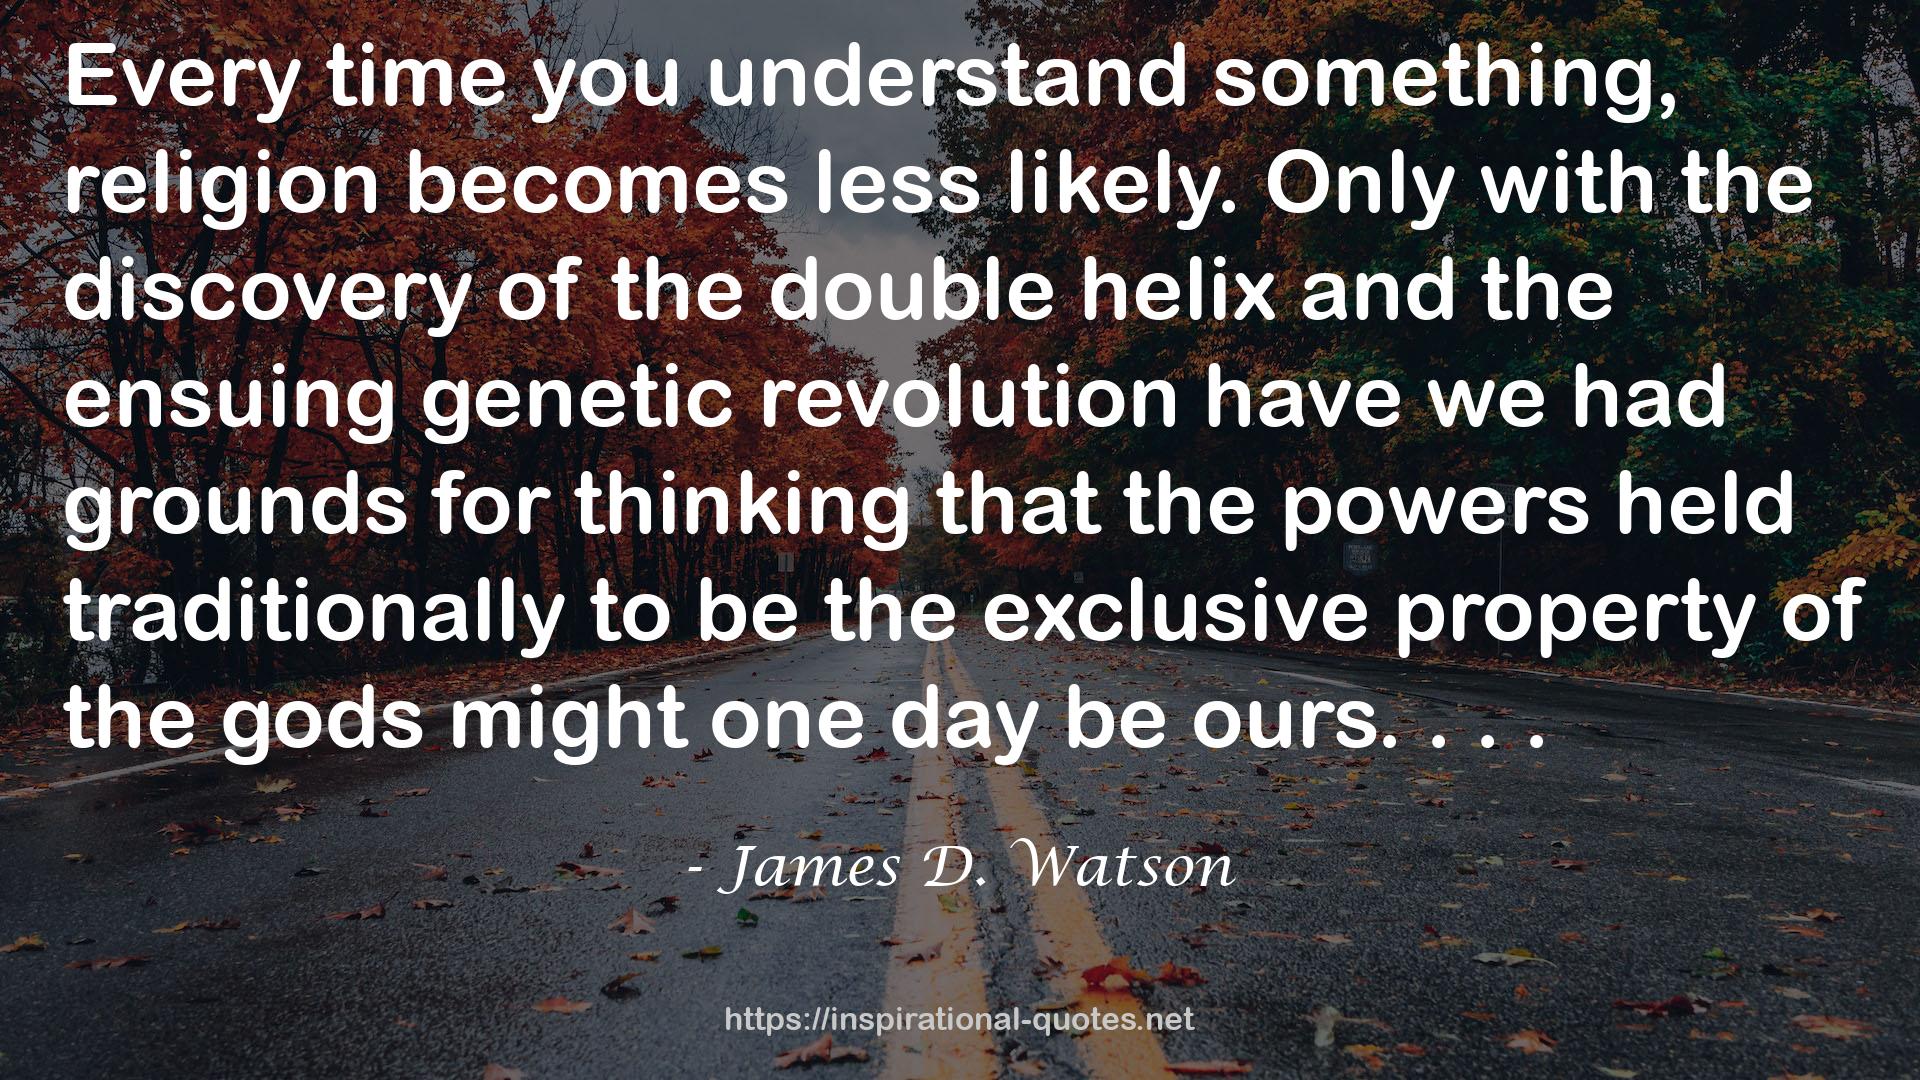 James D. Watson QUOTES